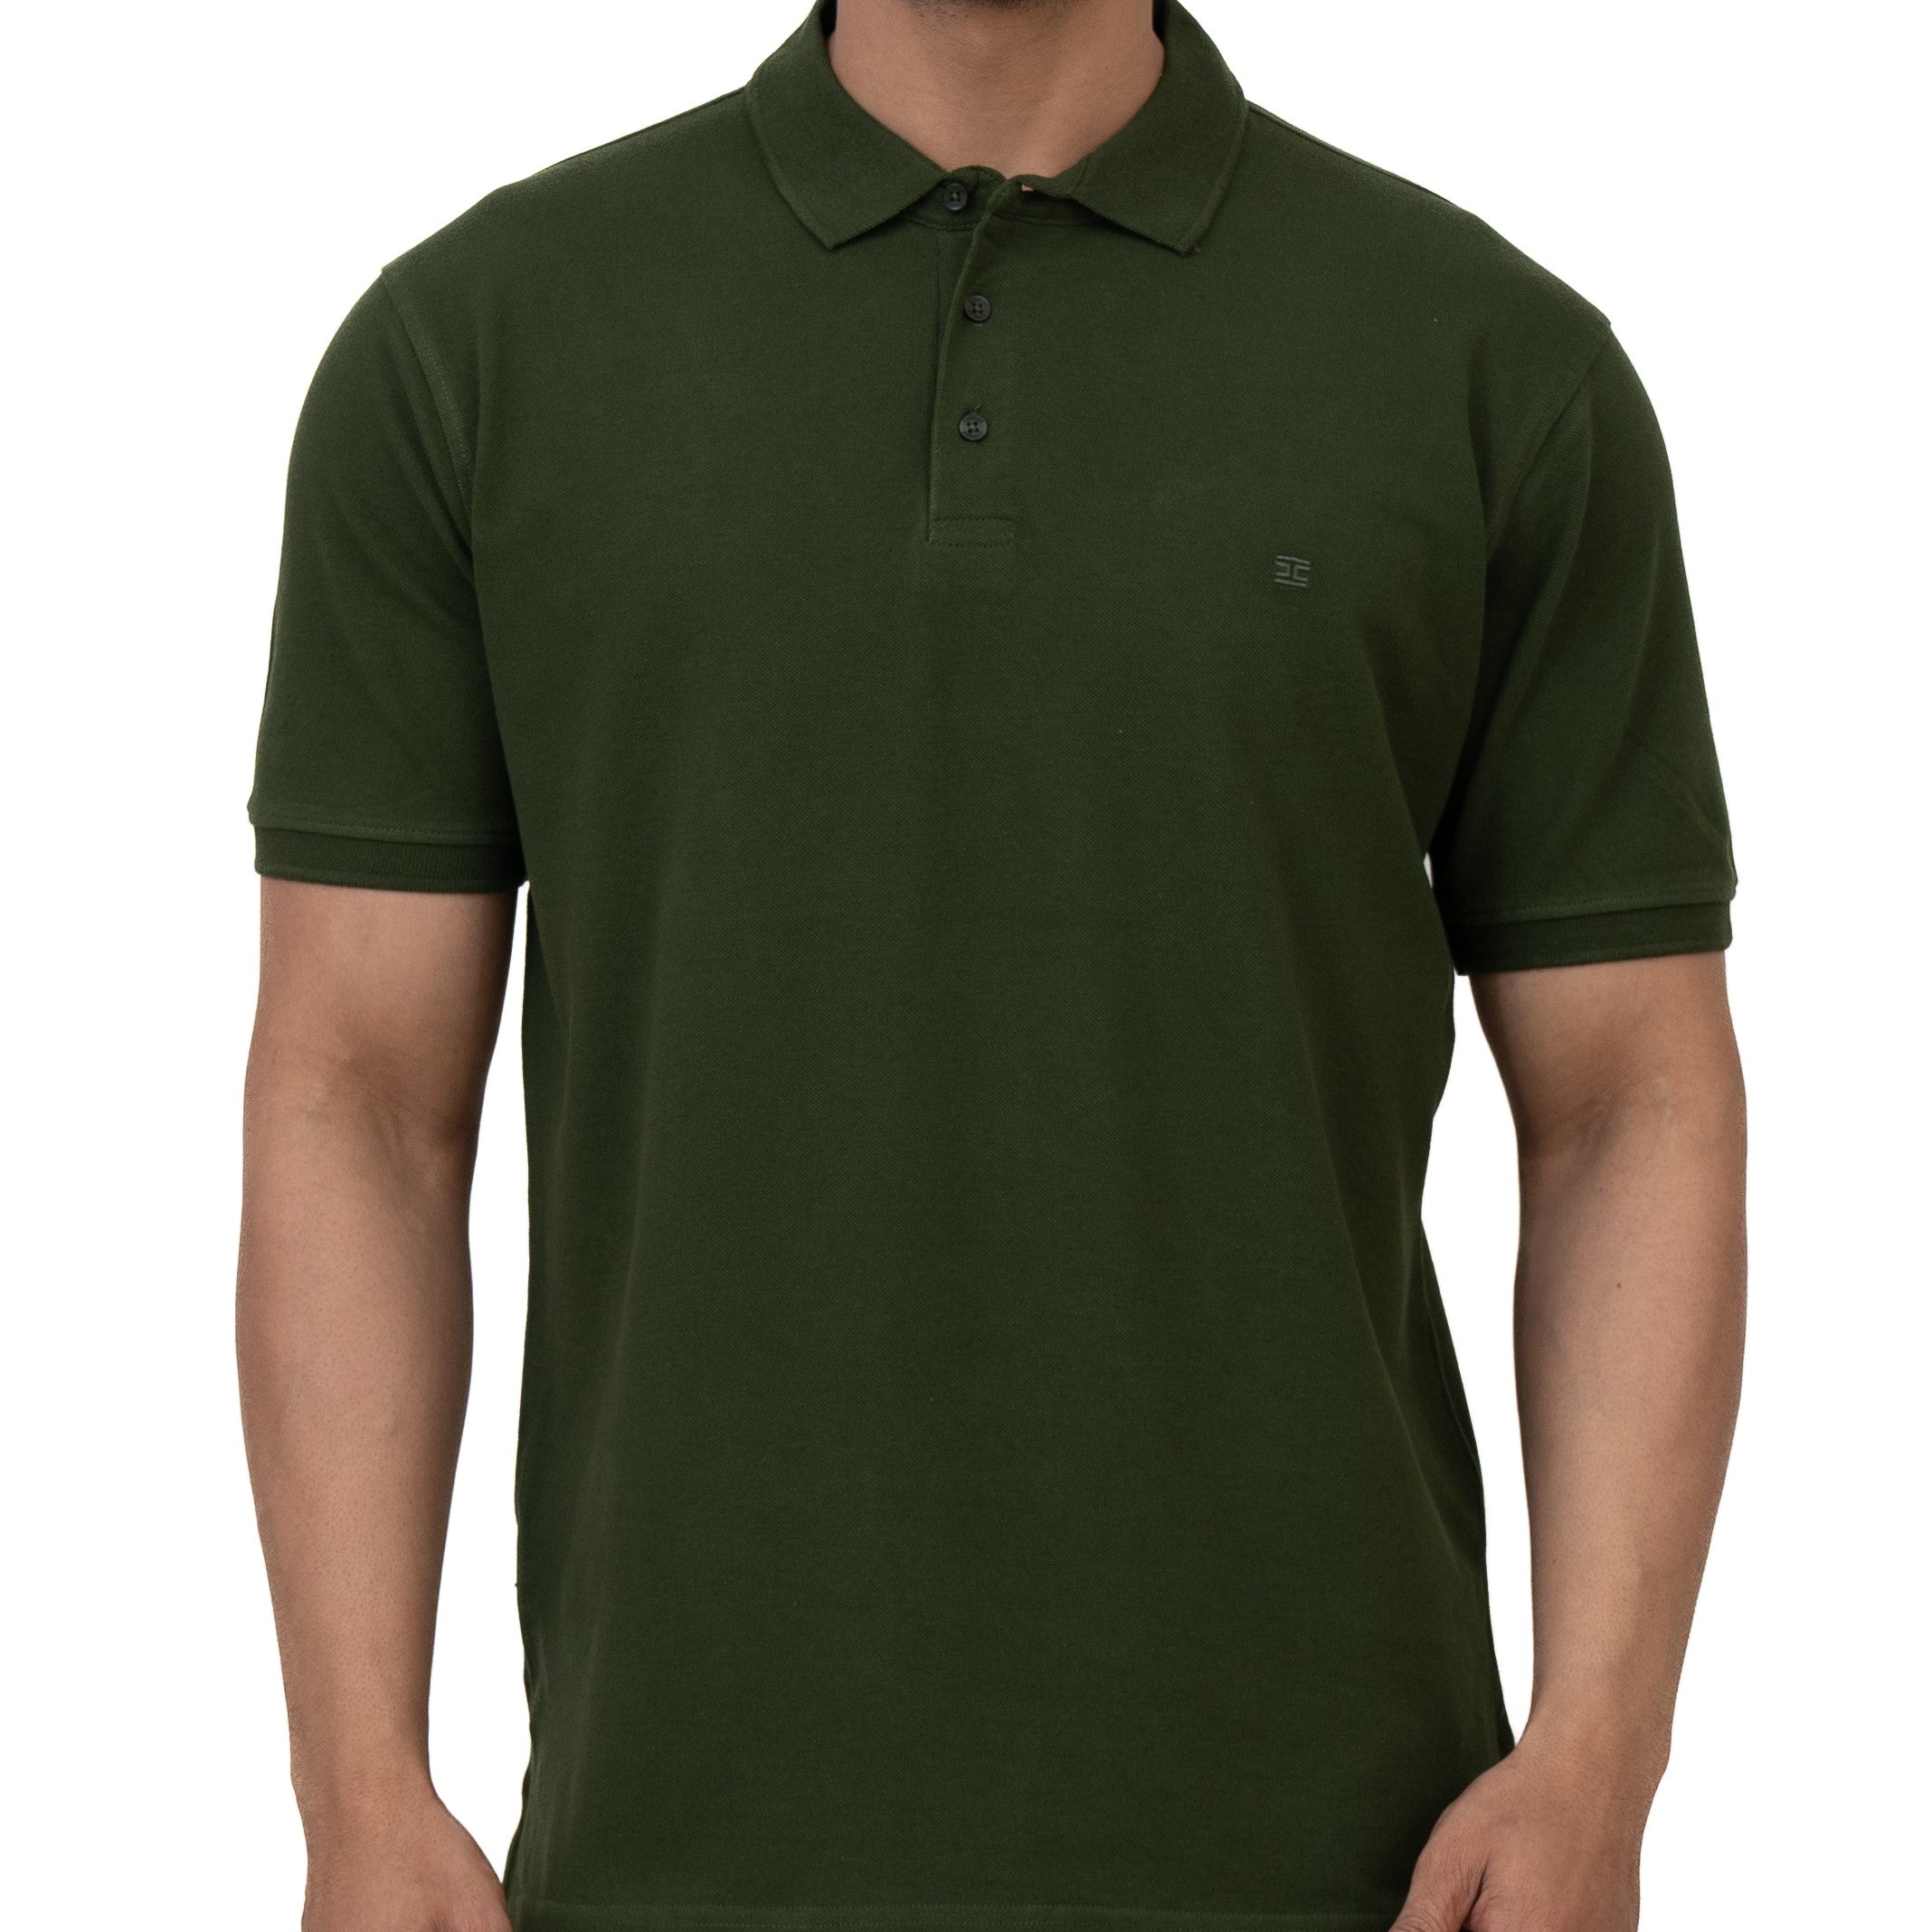 Cotstyle Cotton Fabrics Polo Short Length Plain Half Sleeve Casual & Daily Wear Men's T Shirts - Pack of 1 - Rifle Green Colour